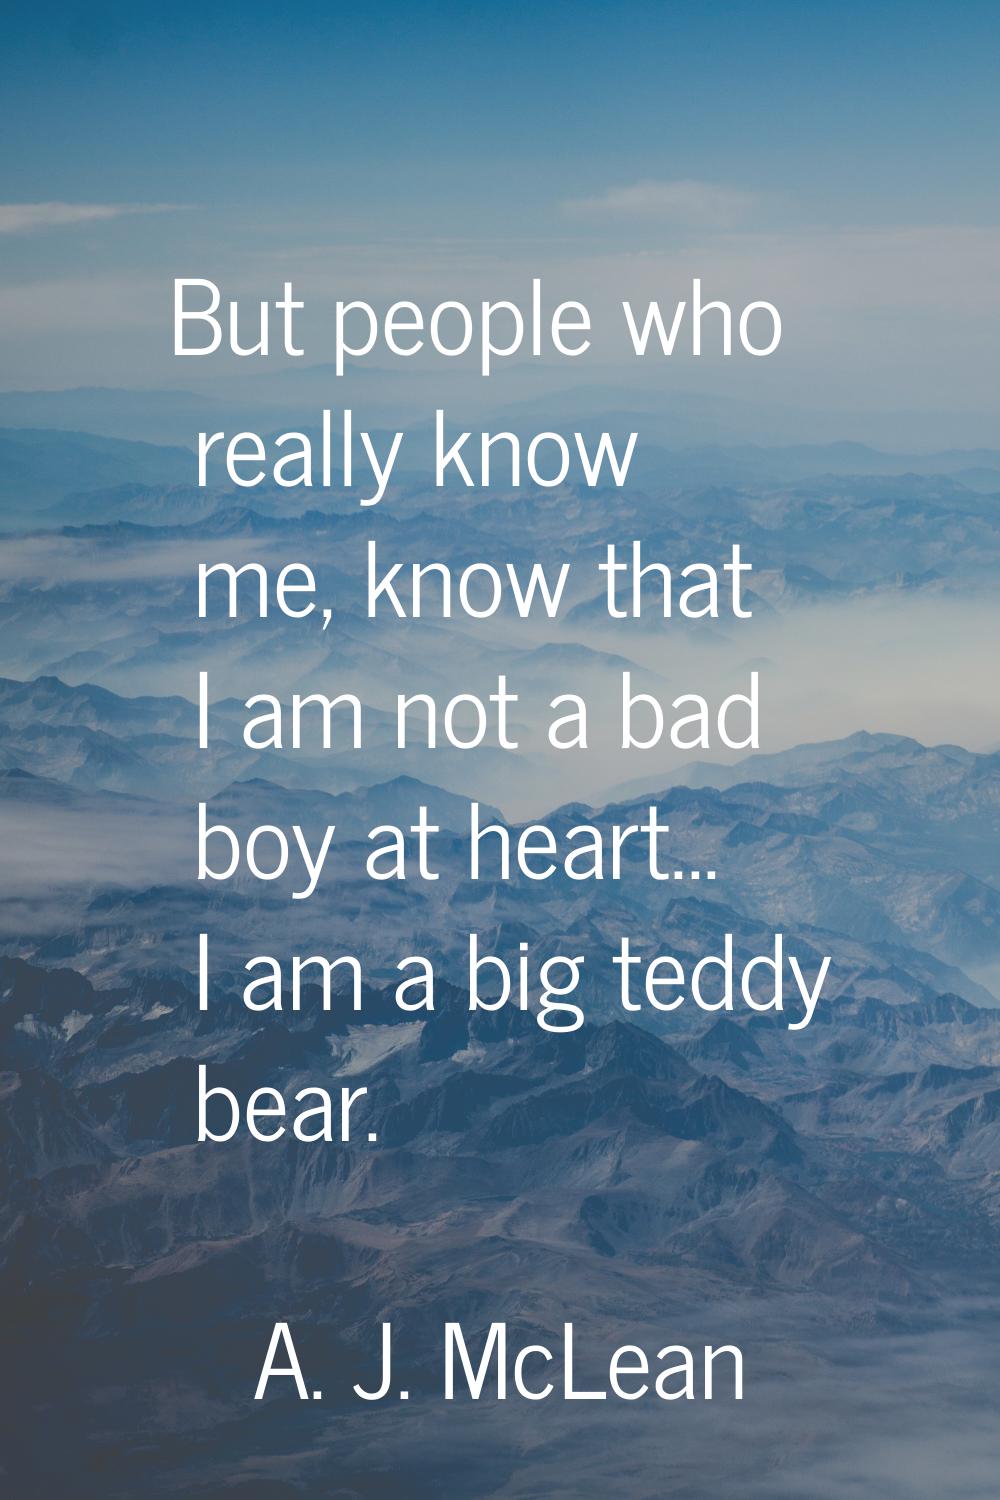 But people who really know me, know that I am not a bad boy at heart... I am a big teddy bear.